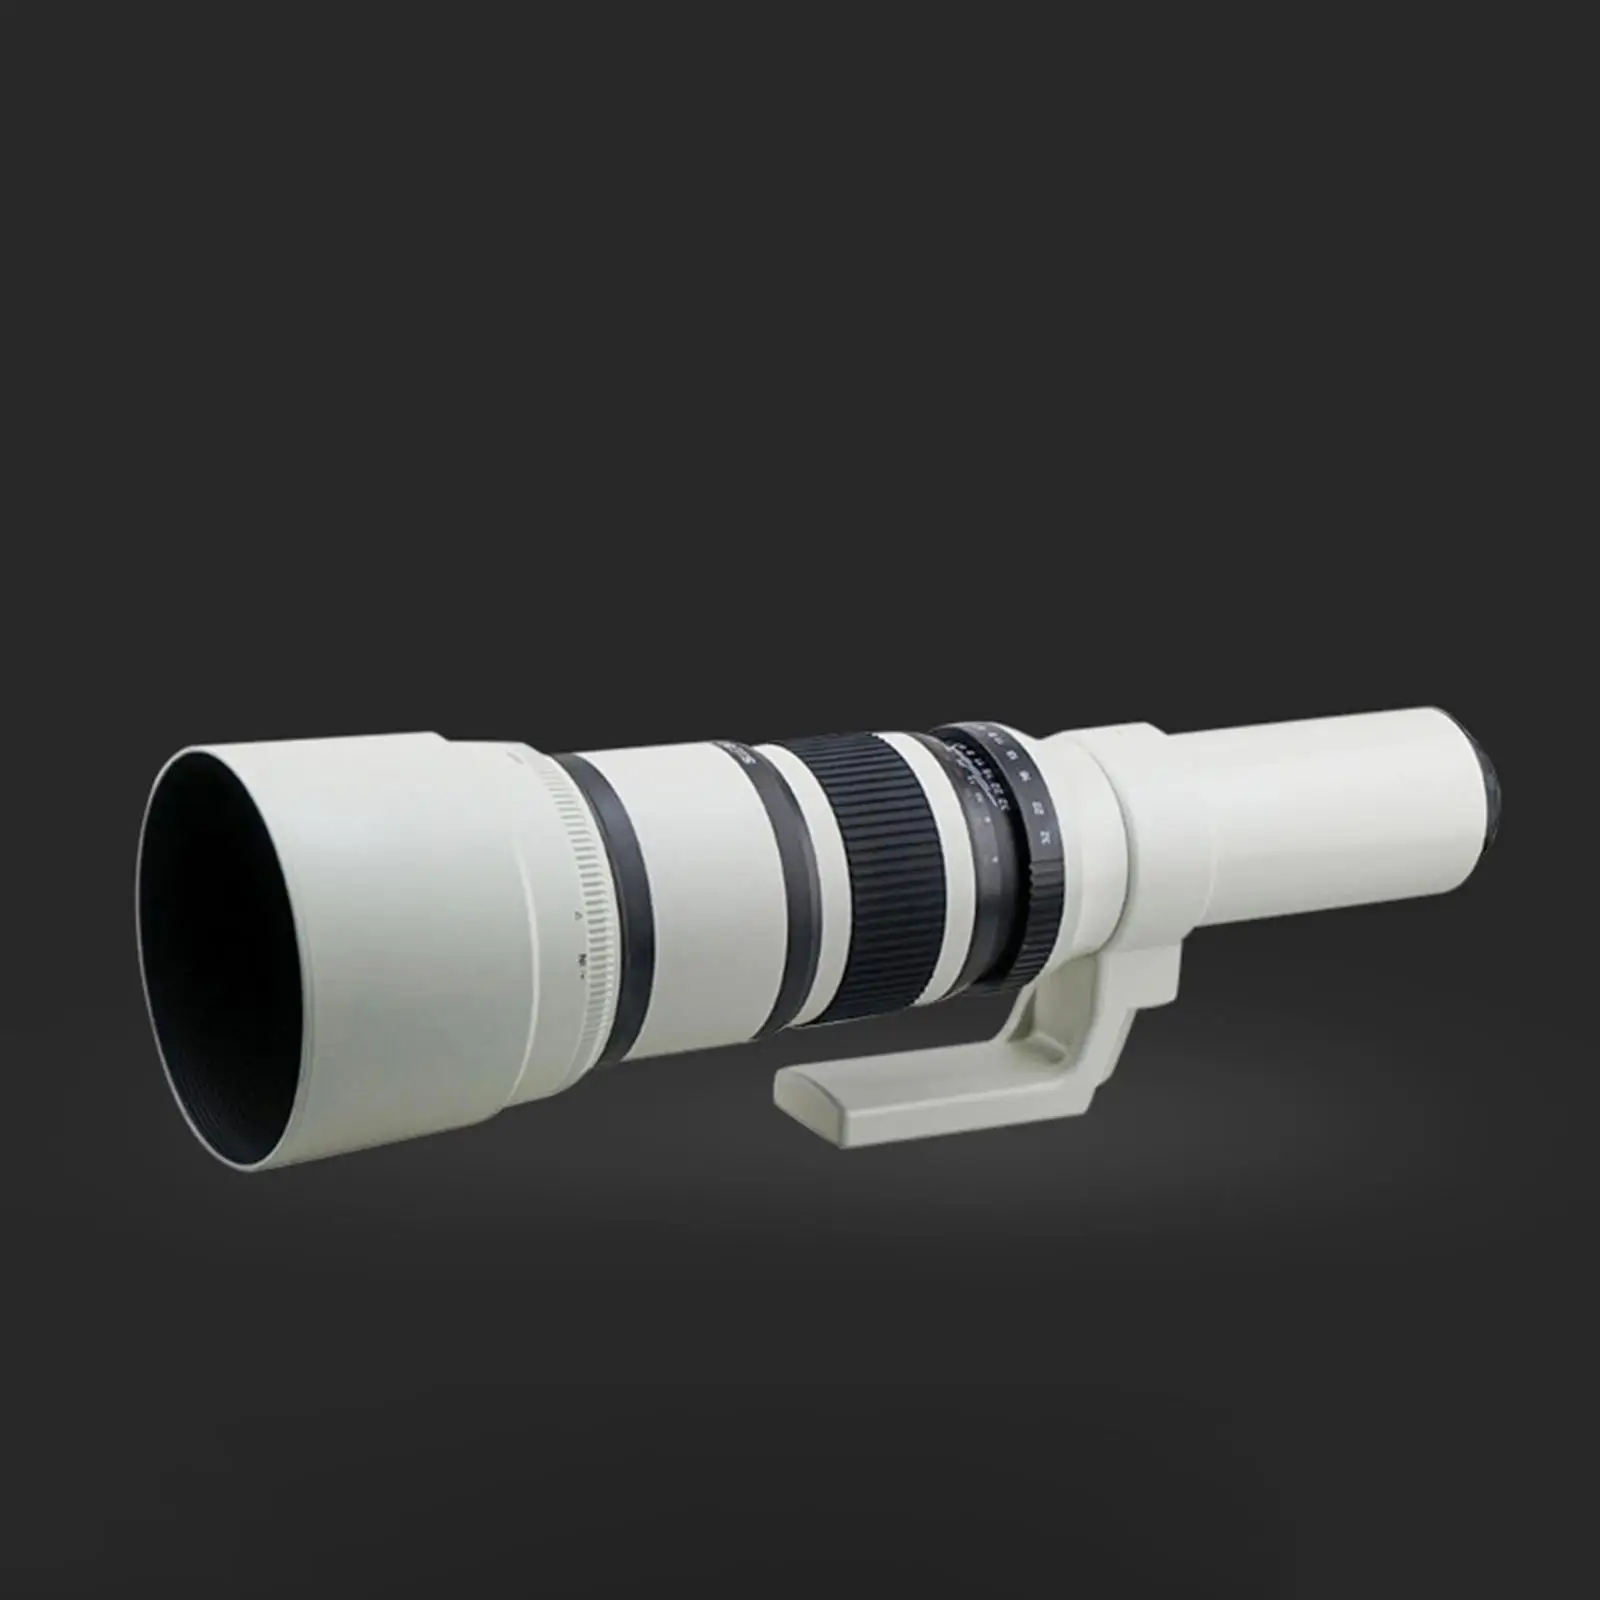 500mm F6.3-F32 Super Telephoto Lens Manual Focusing 86mm Front Filter Diameter Portable T2 Mount with PU Bag Fixed Focus Lens